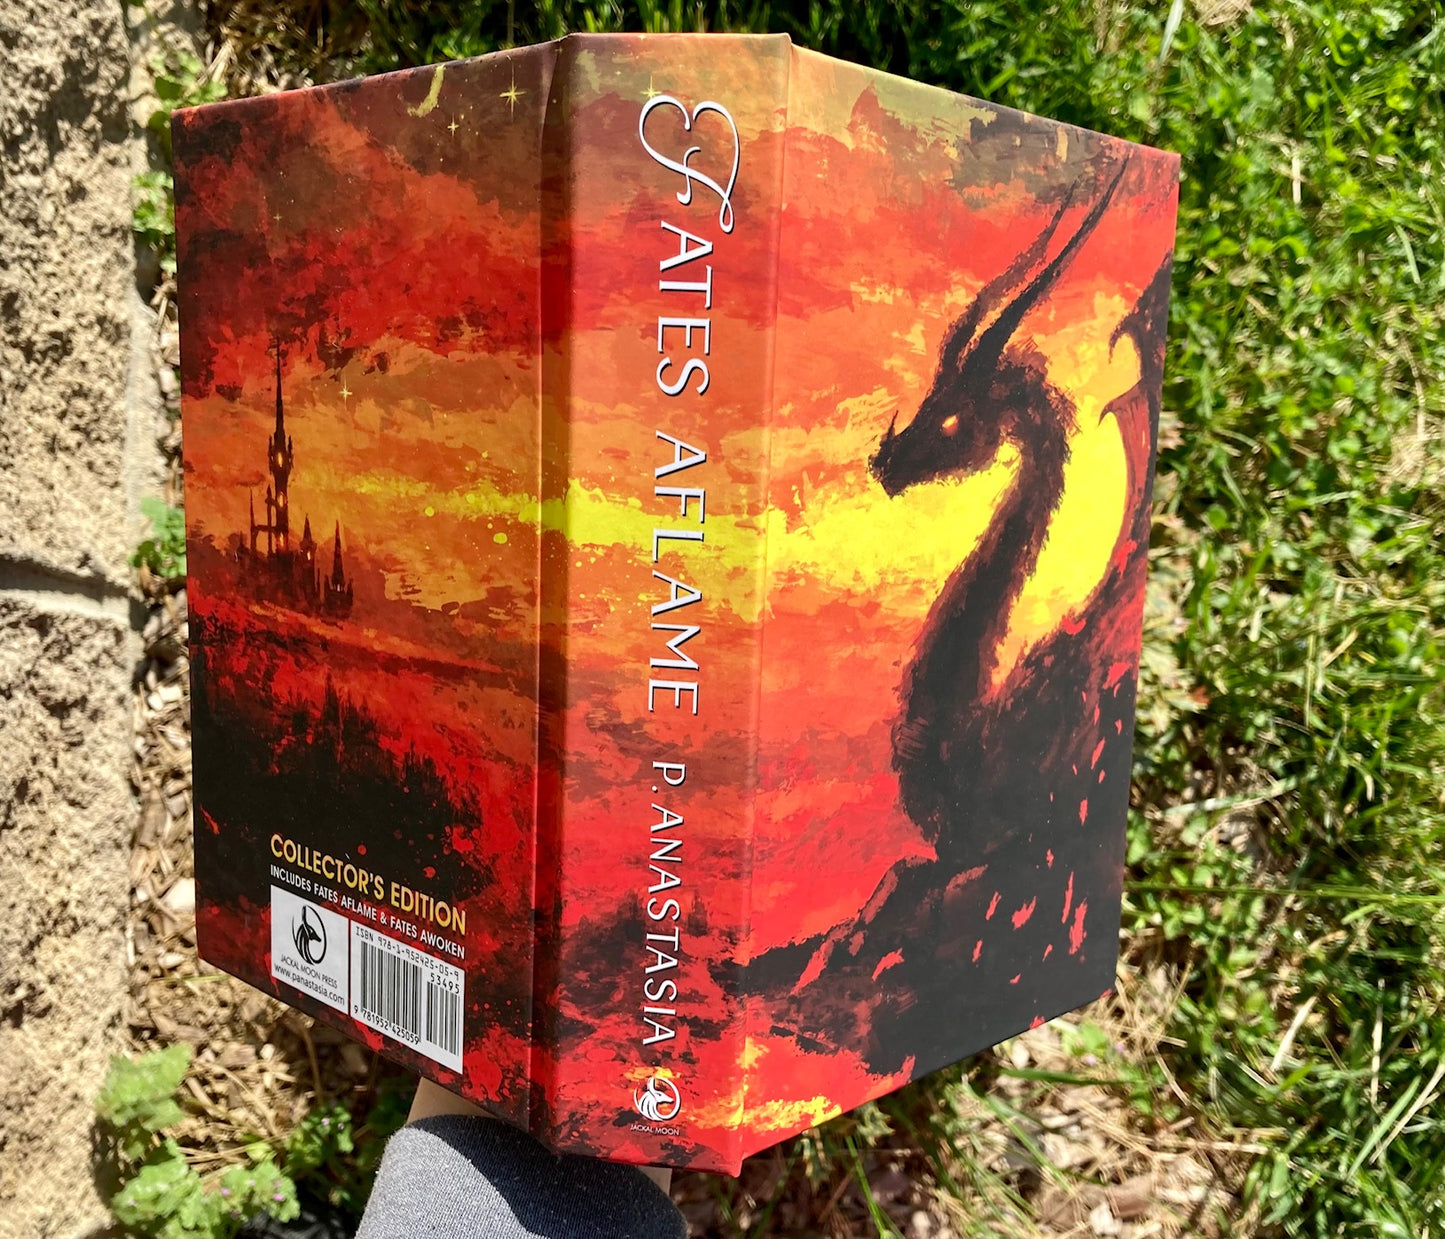 SIGNED Fates Aflame Collector's Edition 6" X 9" Hardcover Illustrated Casewrap + Dust jacket [Contains Fates Aflame, Fates Awoken, Fates Aligned] 658 pages  *Ships in 2-3 business days*